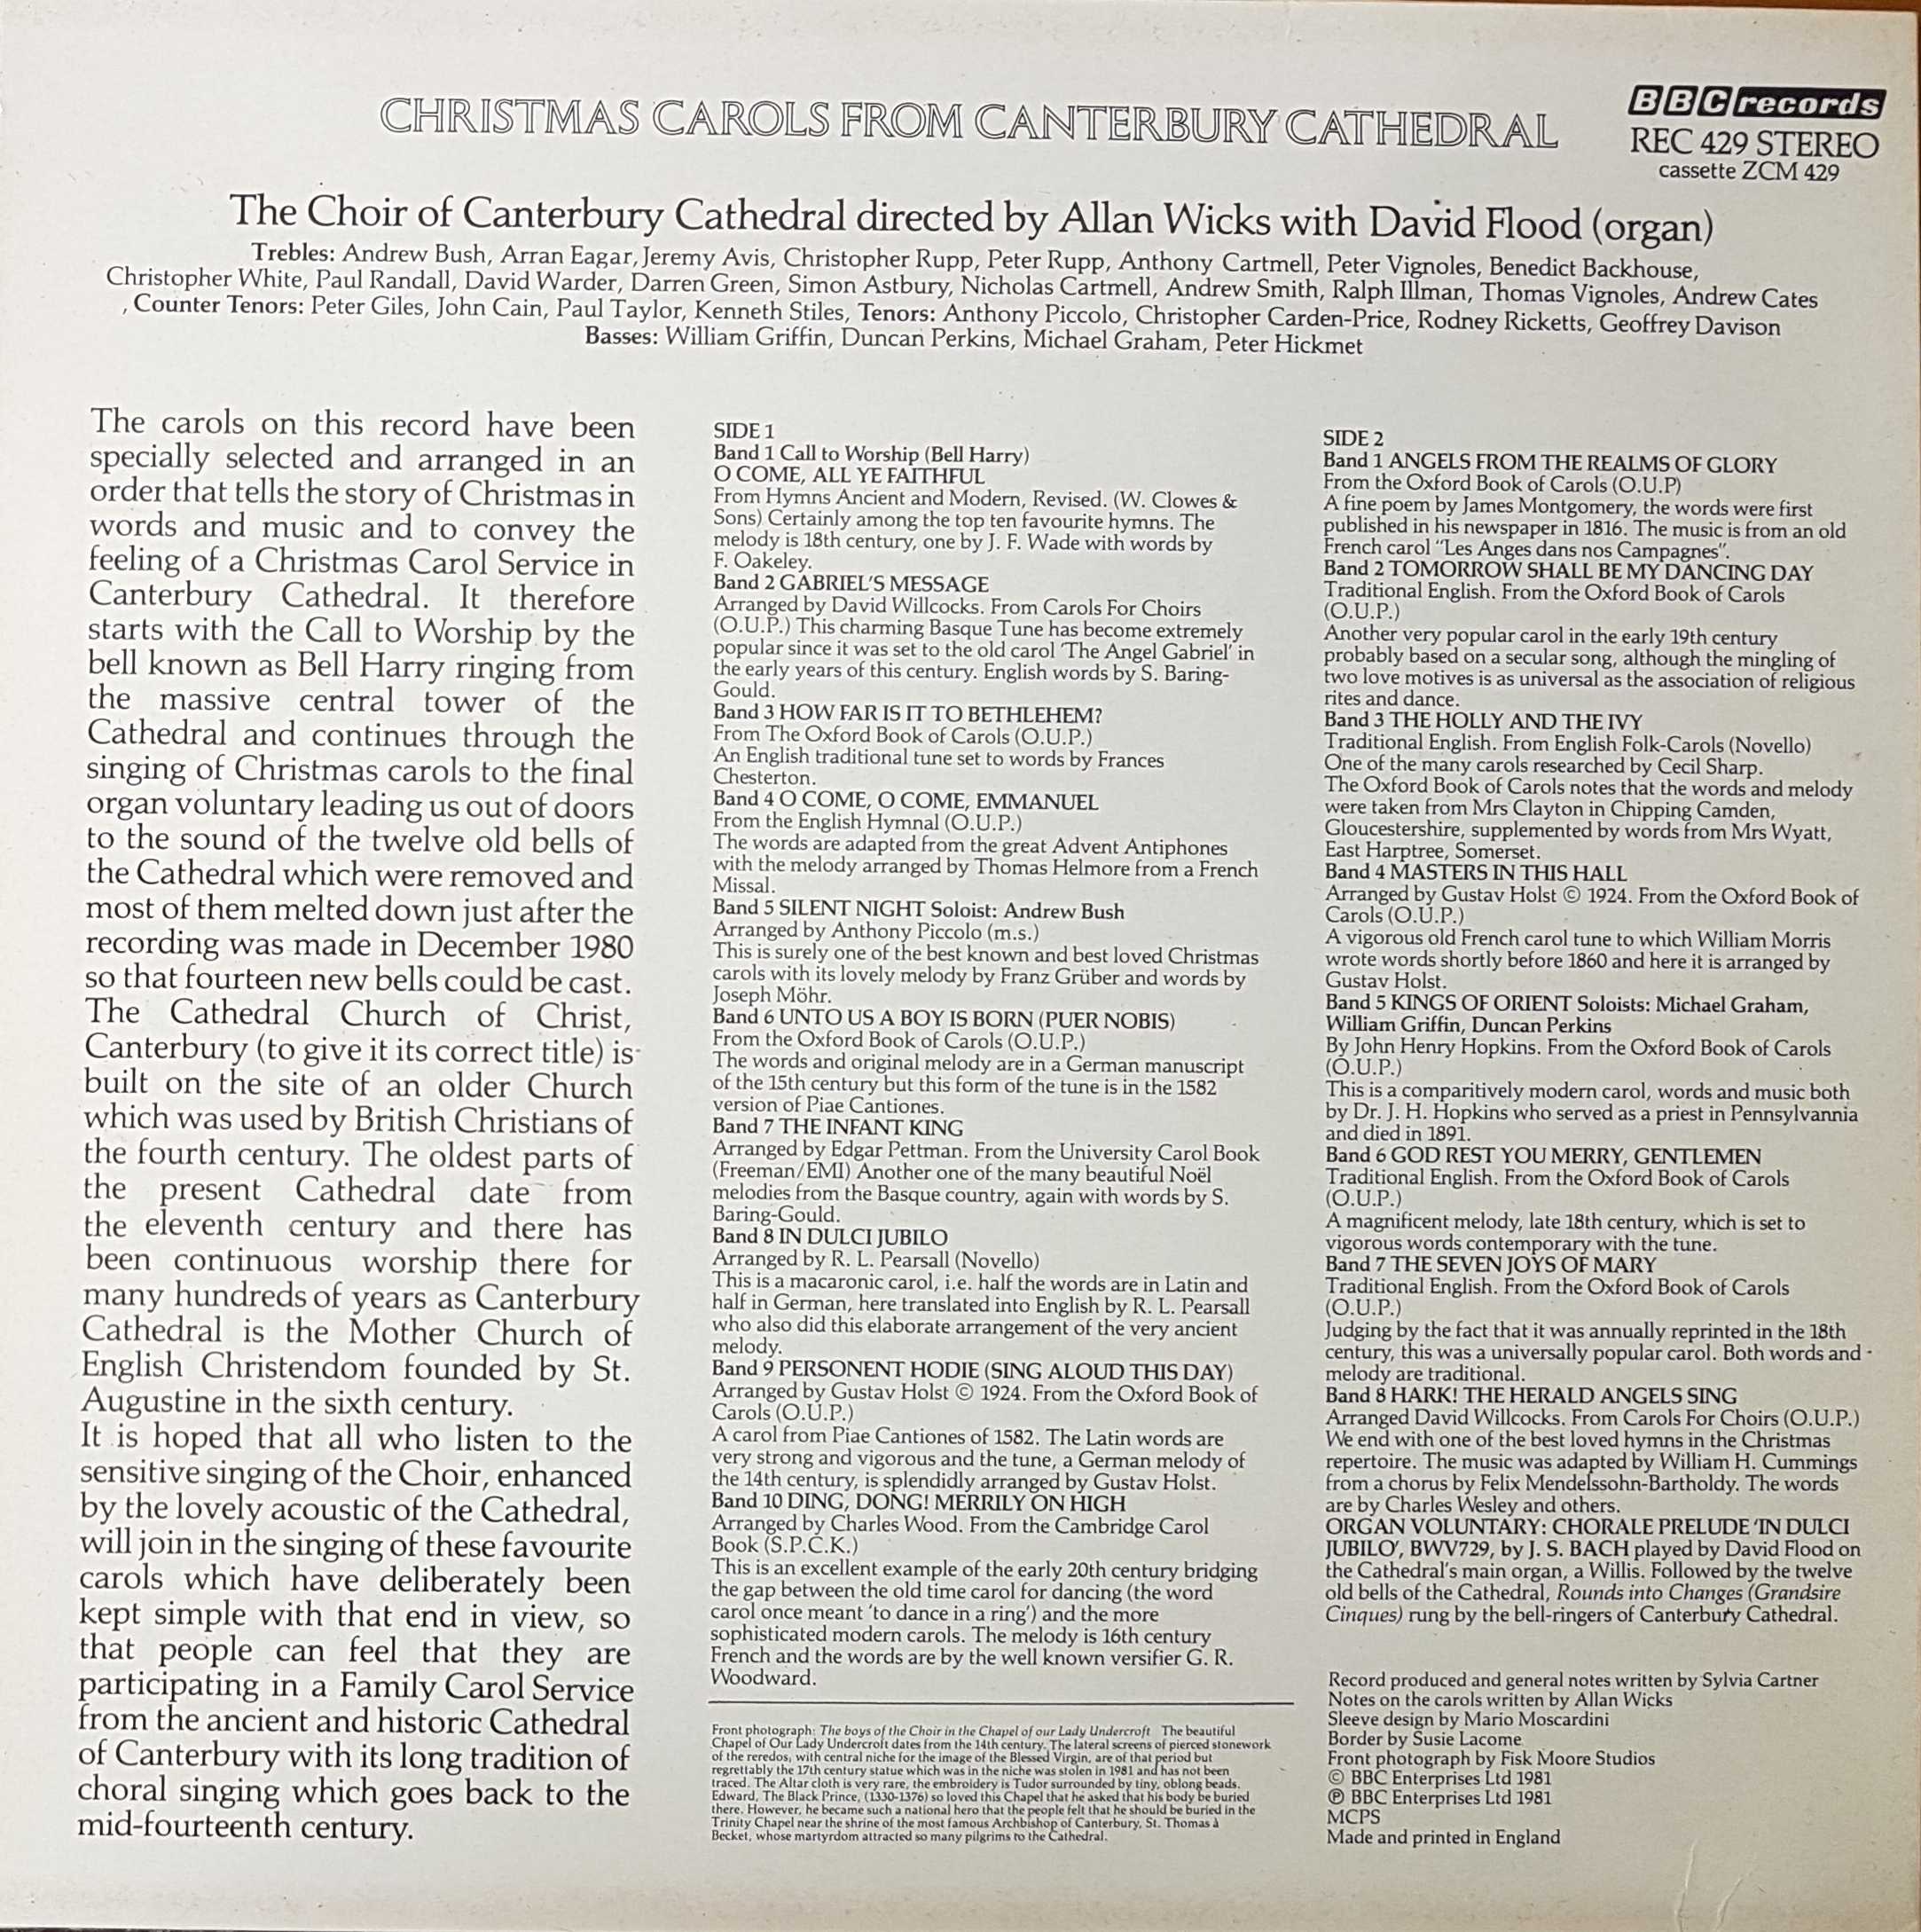 Picture of REC 429 Christmas carols from Canterbury Cathedral by artist Various from the BBC records and Tapes library